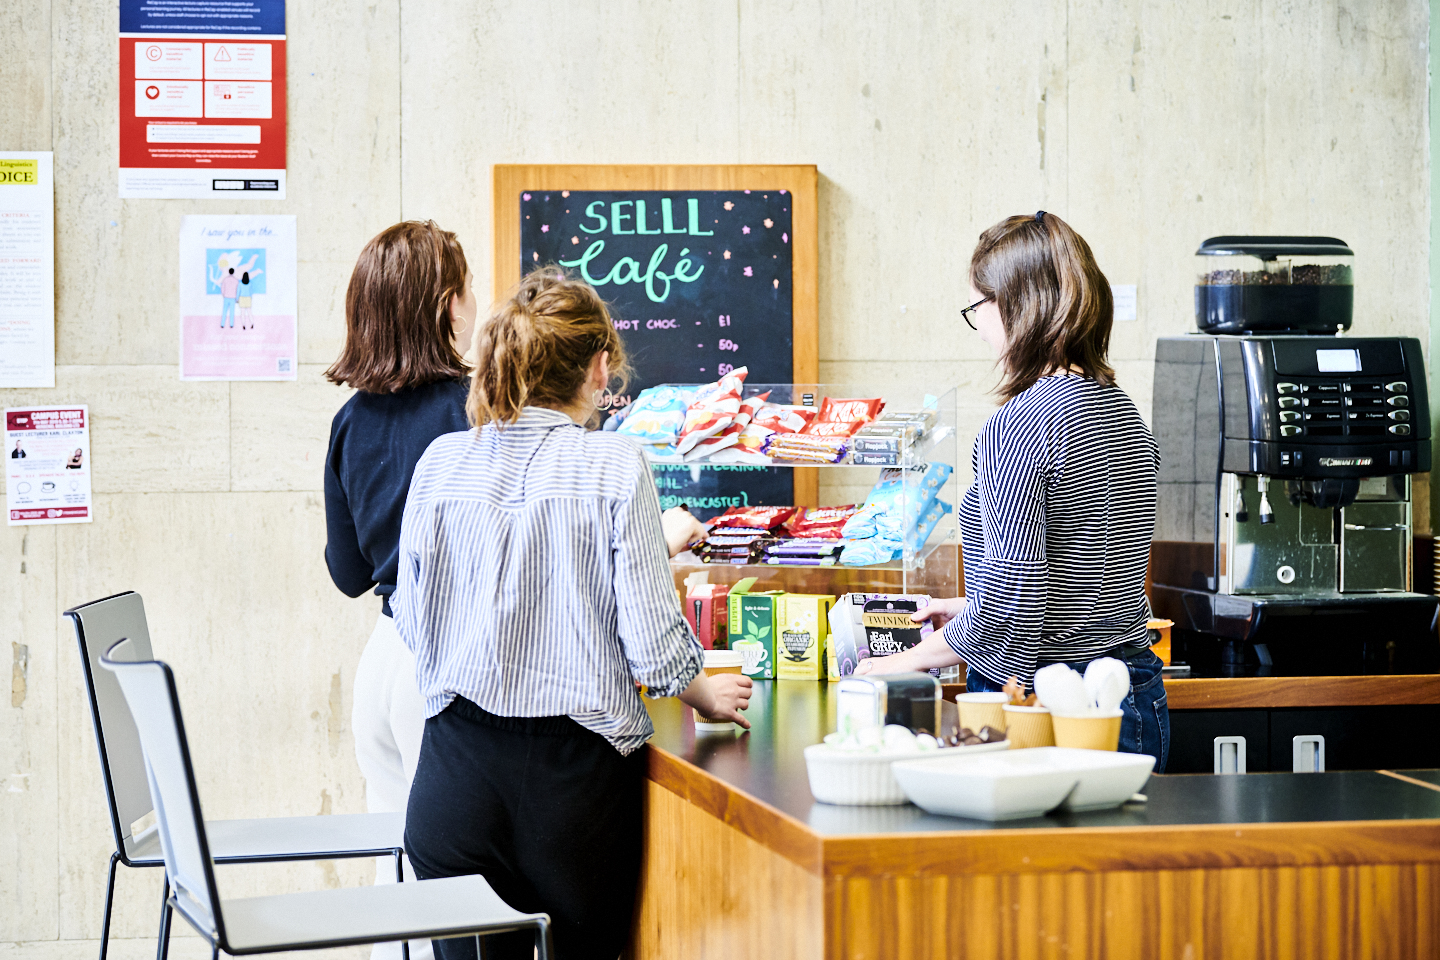 Students at the SELLL Cafe in 2019.